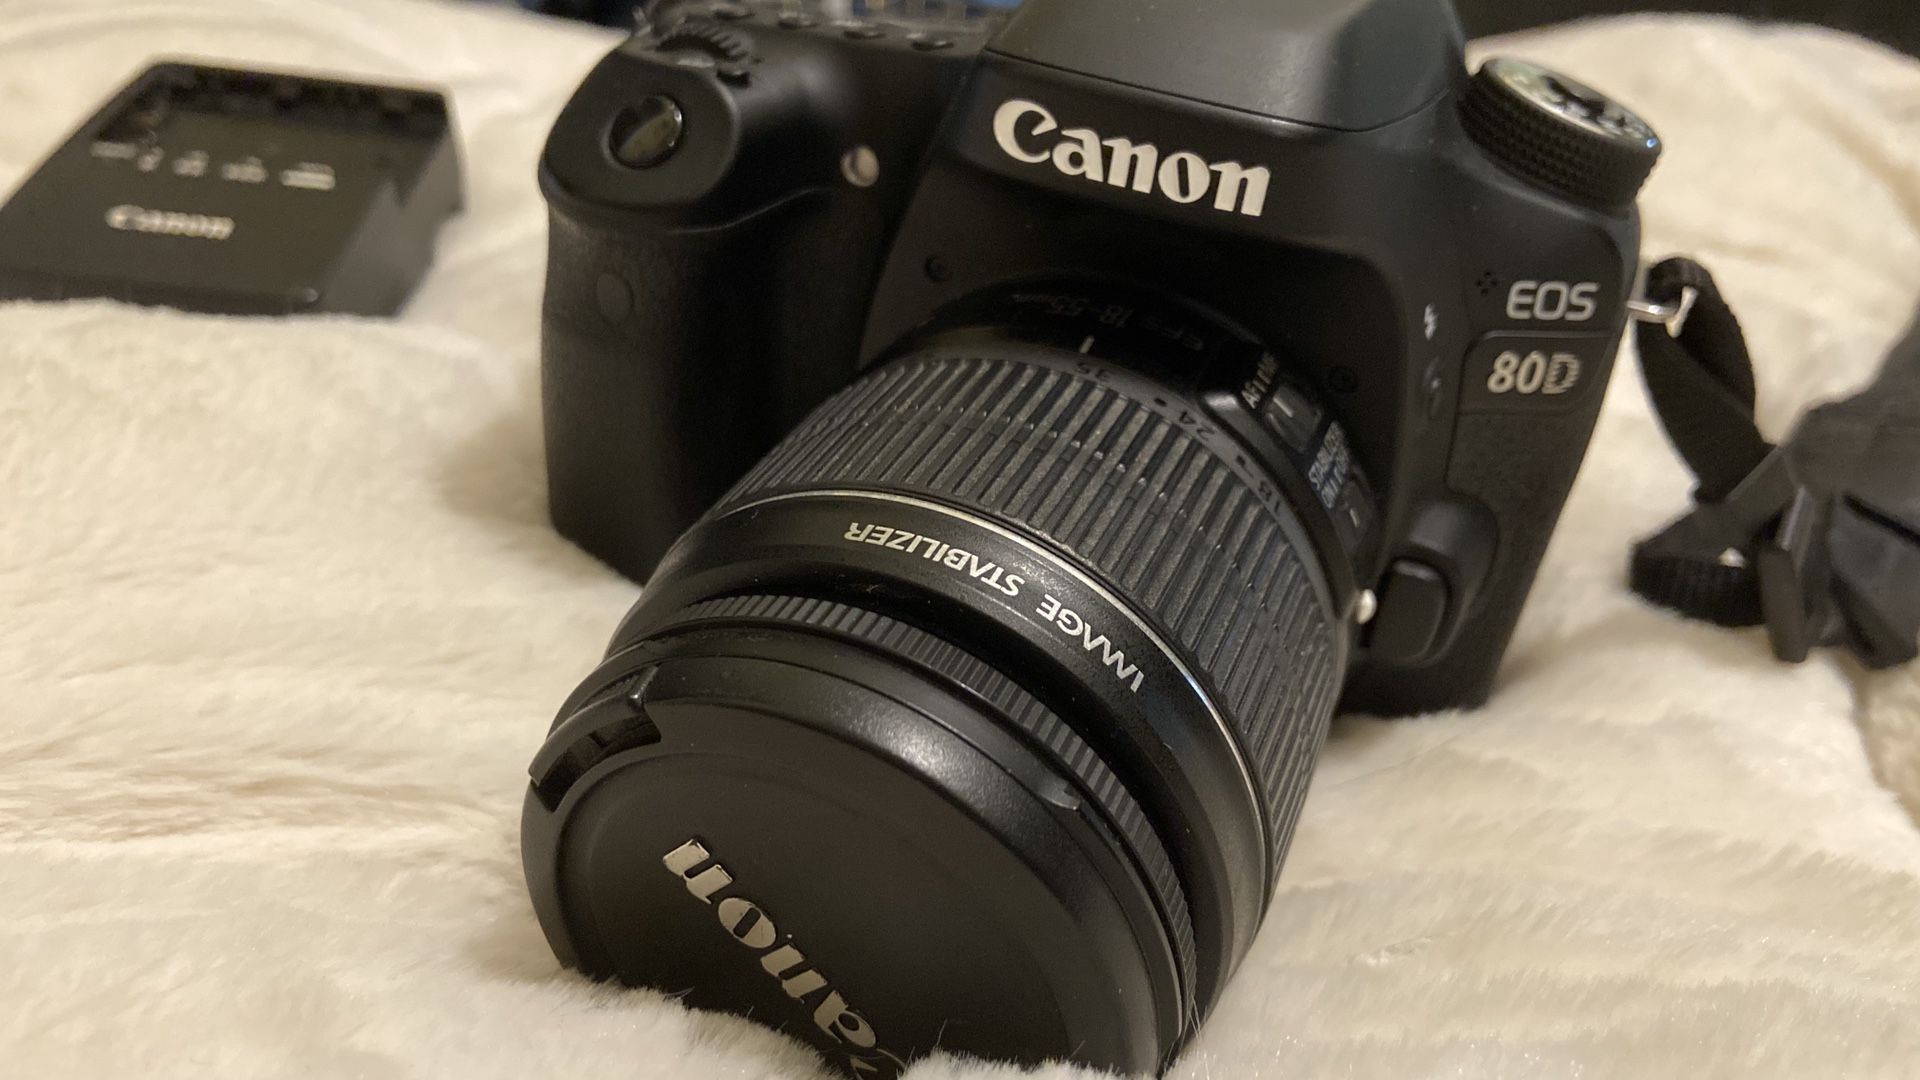 Canon EOS 80D with 18-55mm lens